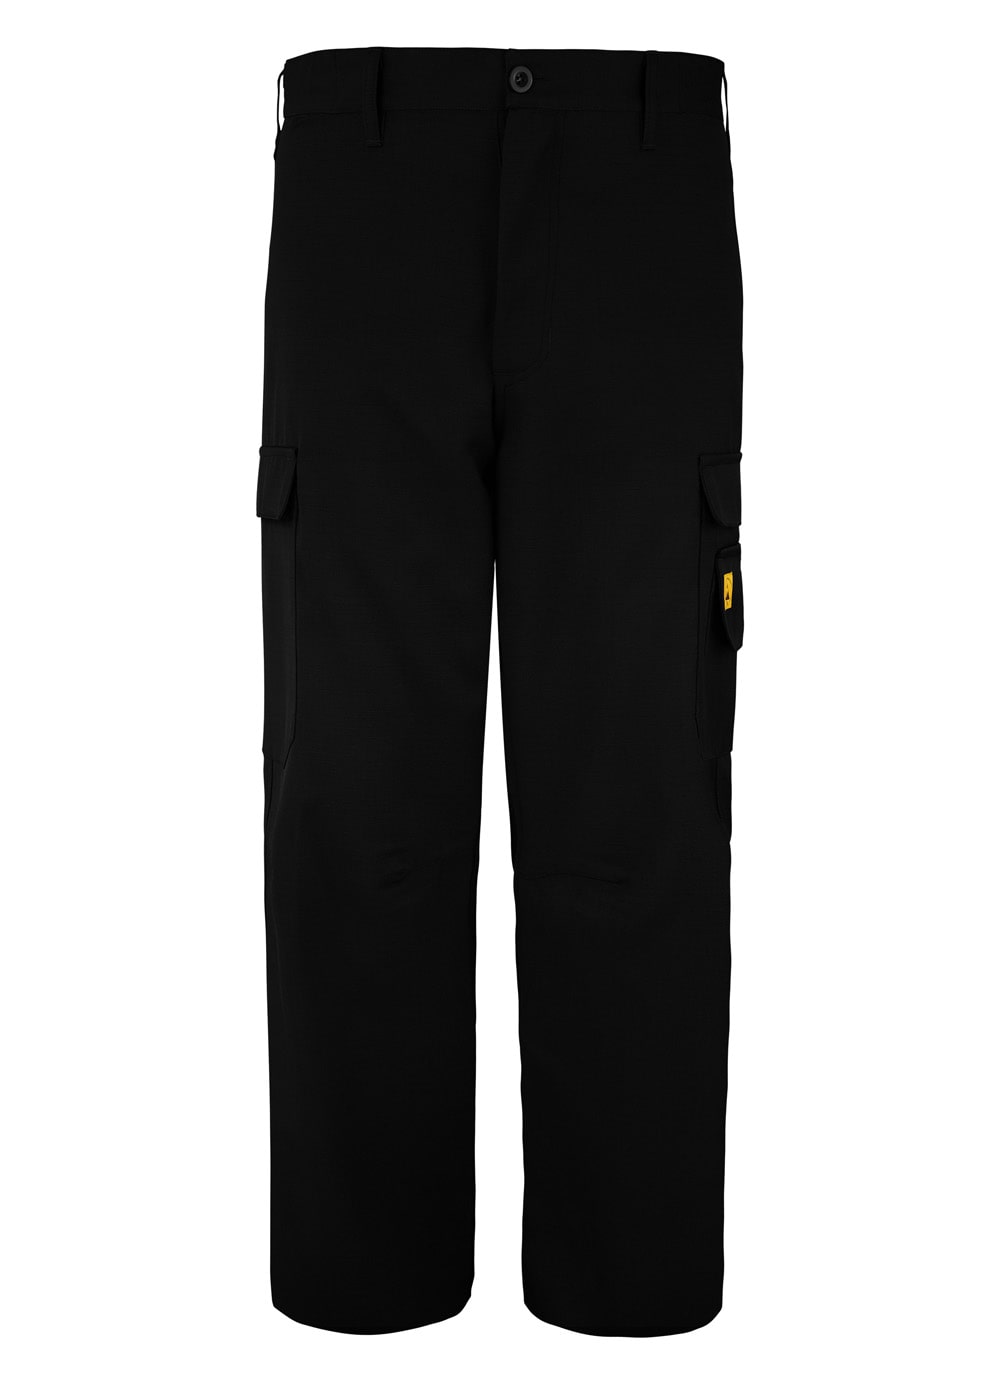 Photo of a pair of trousers, product photography for e-commerce store